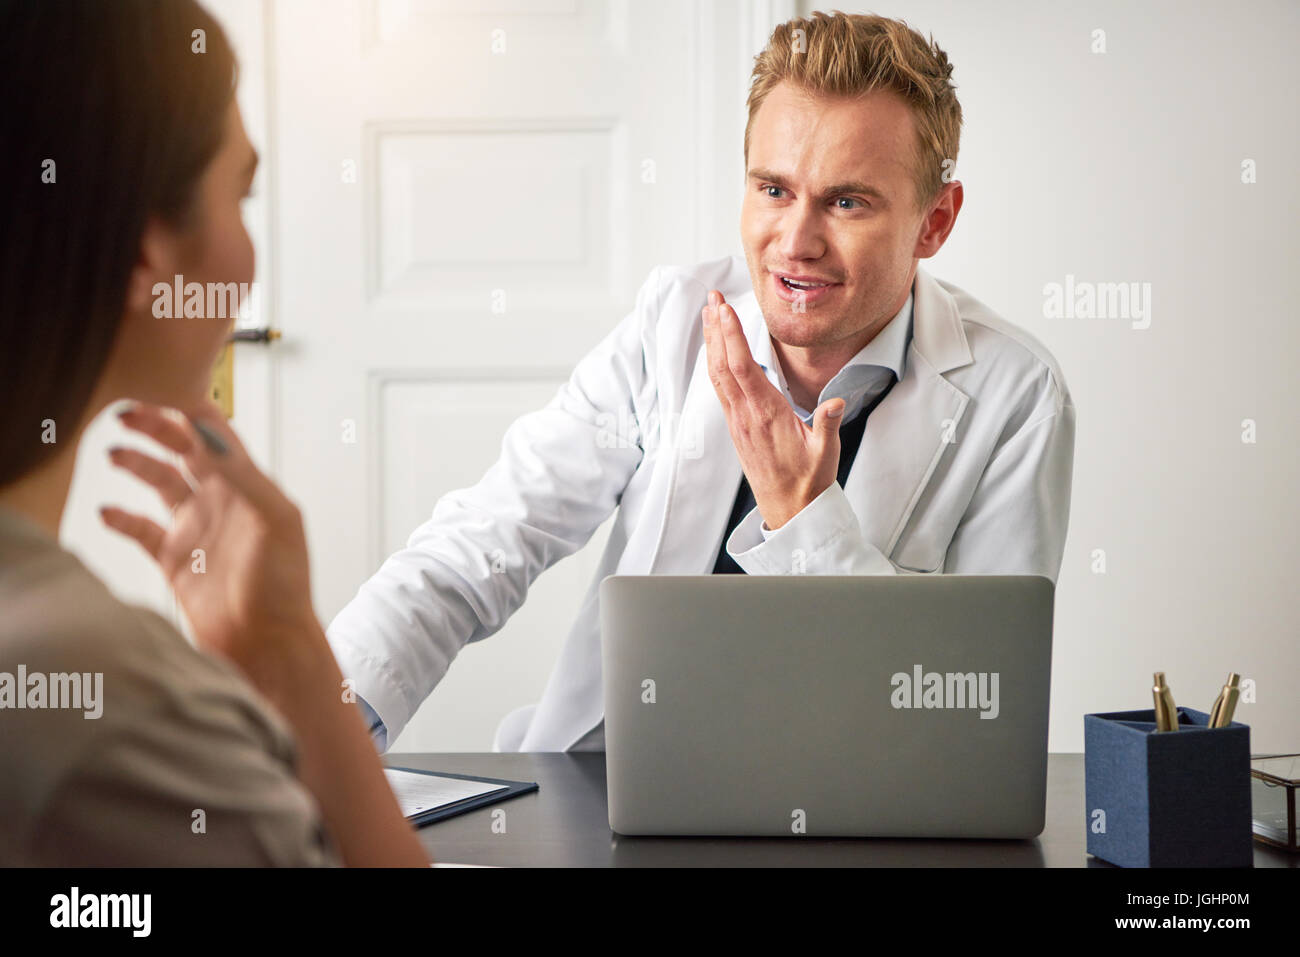 Young smiling cosmetologist man sitting at a laptop in the office and communicating with a woman. Stock Photo